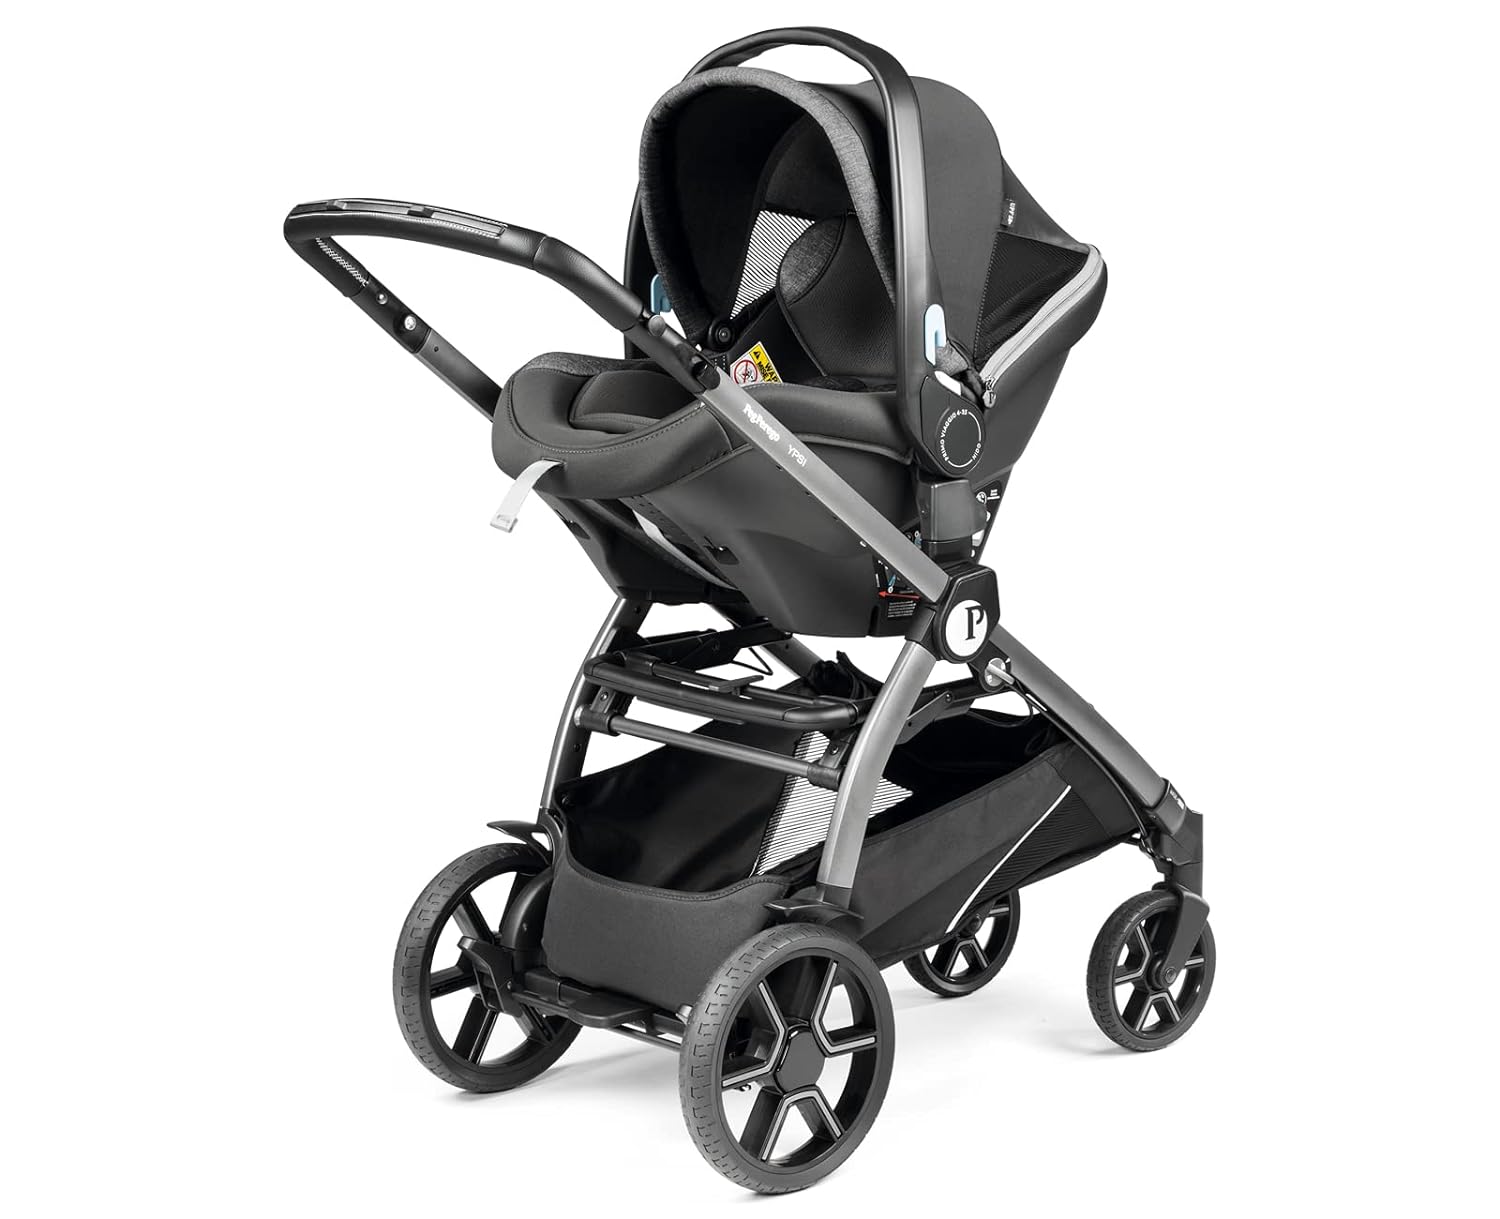 Peg Perego Ypsi Travel System - Includes Ypsi Lightweight Reversible Stroller and Primo Viaggio 4-35 Nido Infant Car Seat - Made in Italy - Onyx (Black) - Peg Perego Ypsi Travel System Review